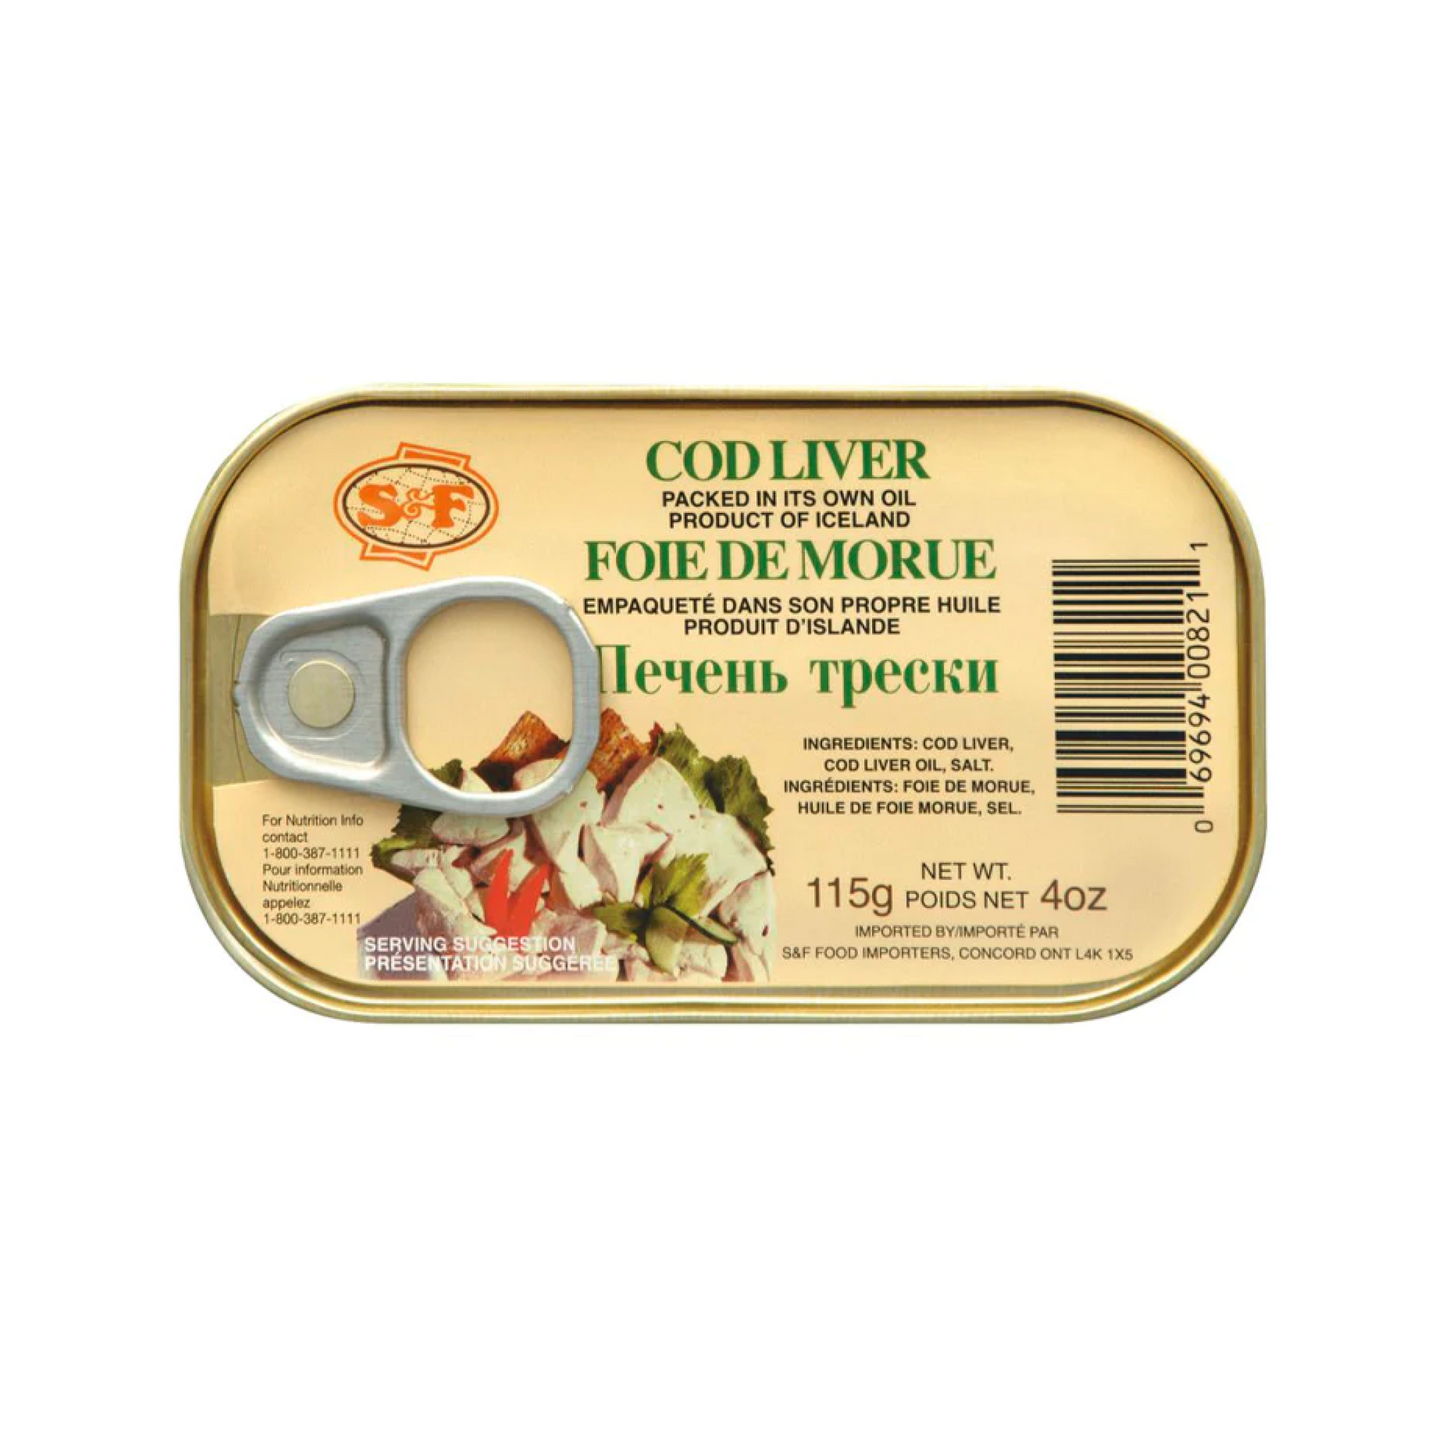 S&F Cod Liver in its own Oil 120g